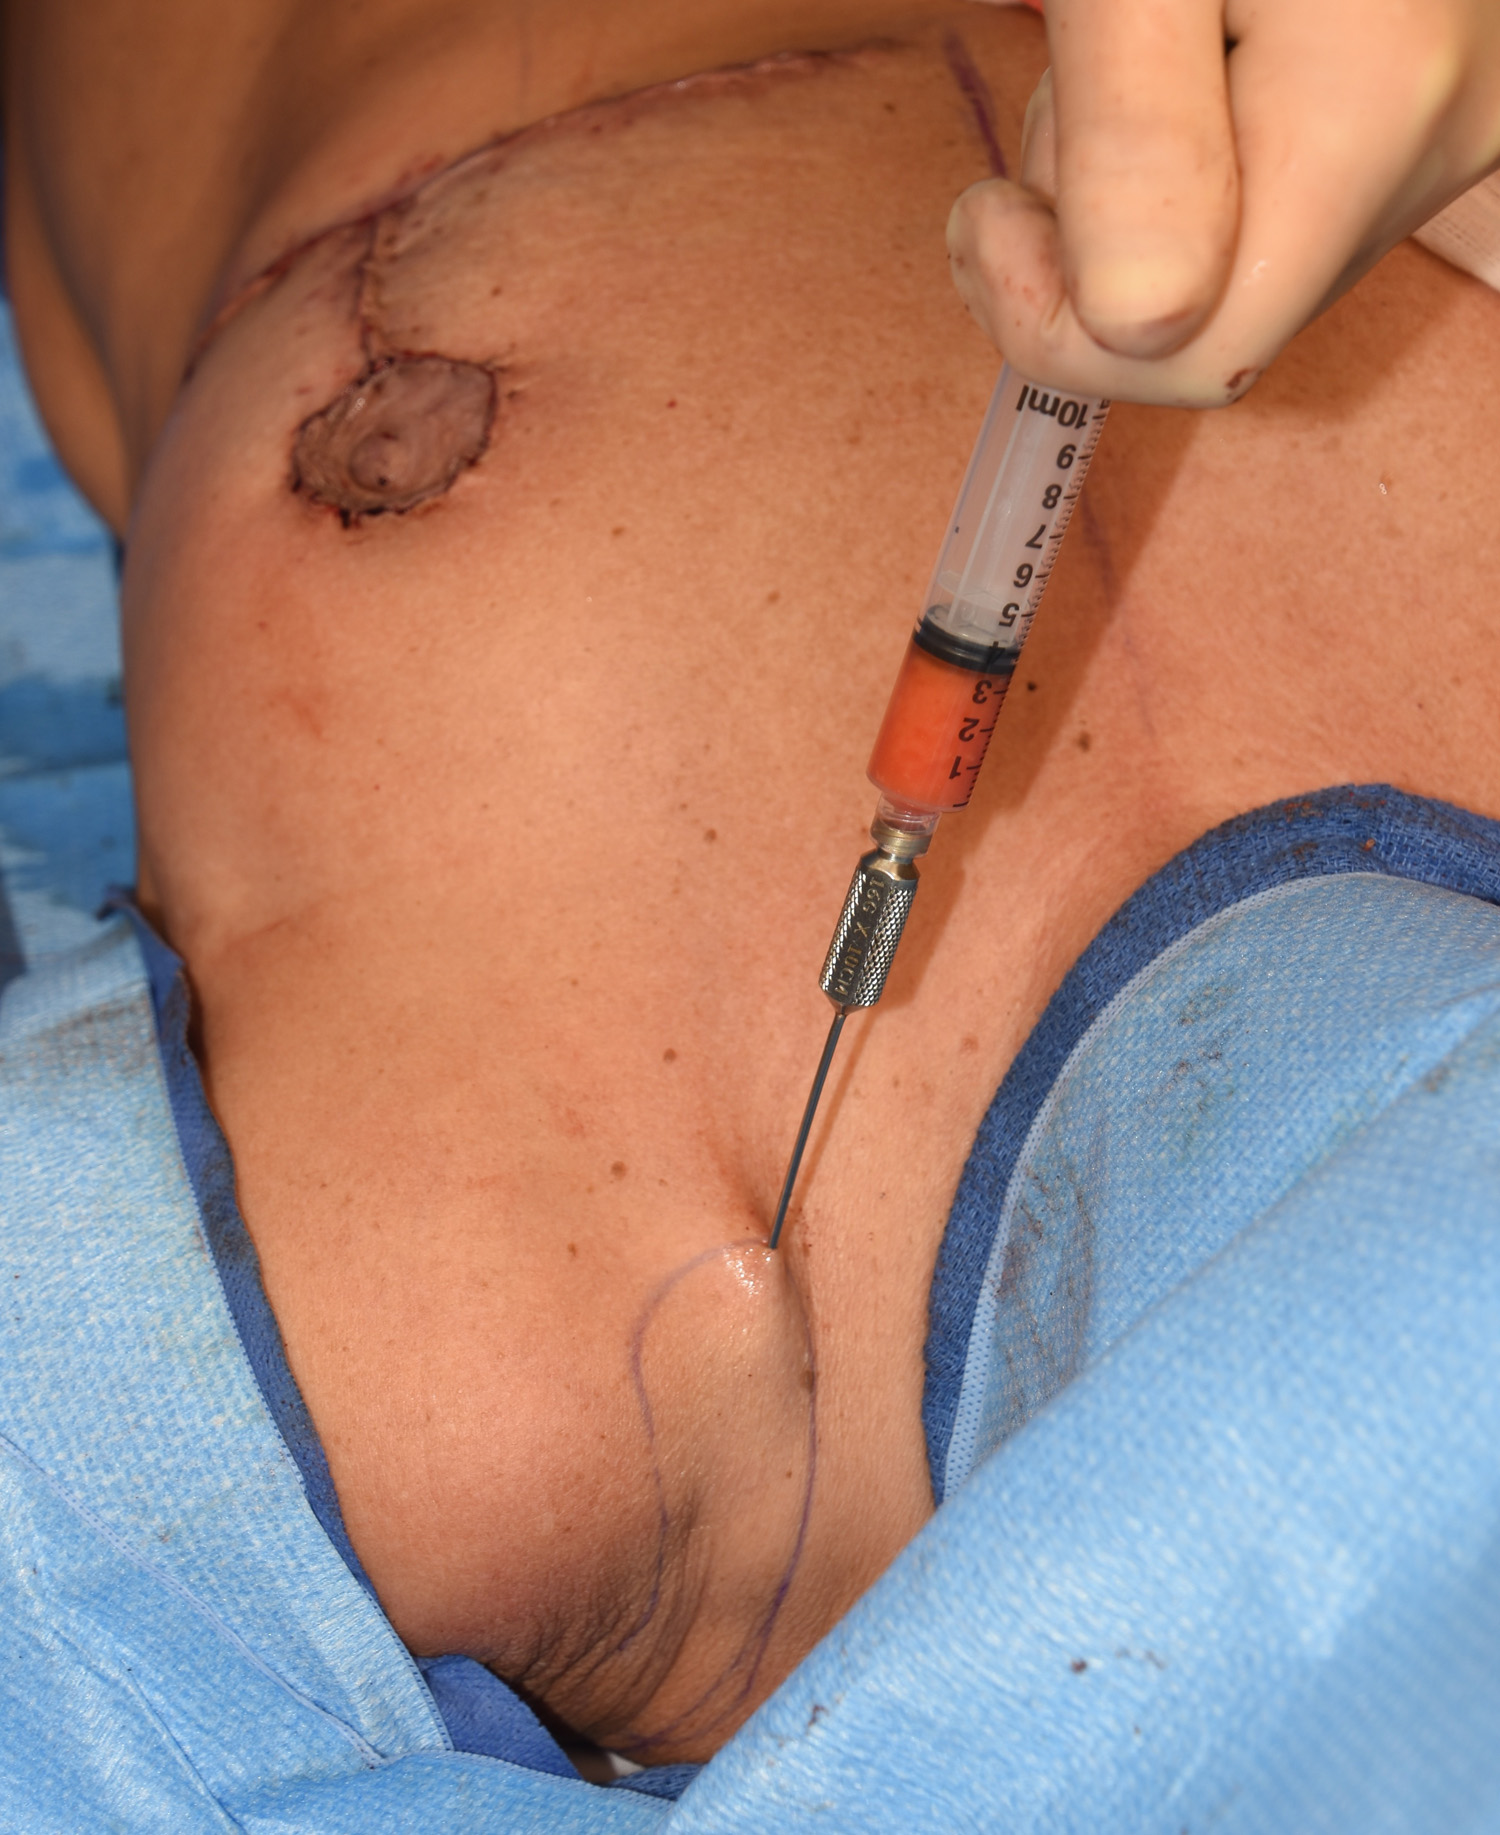 Shoulder Groove Fat Grafting in Breast Reduction Surgery - Explore Plastic  Surgery